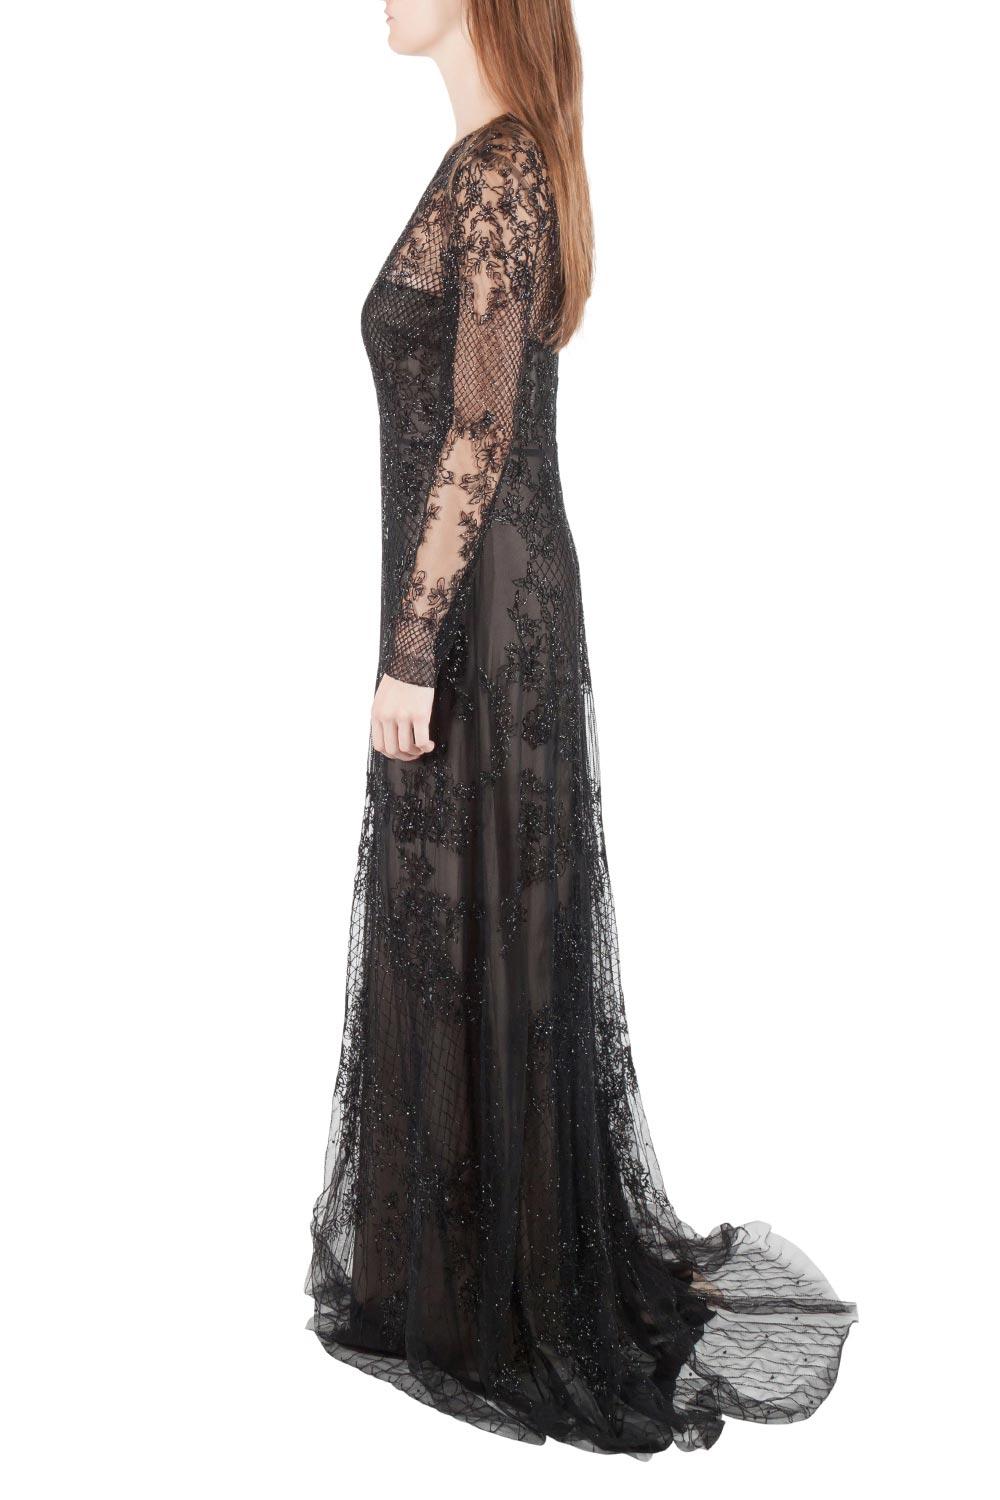 Masterfully constructed in nylon, this gown will make heads turn. This black dress, featuring beautiful embellishments and long sleeve also comes with a zip to create a favorable shape. From Monique Lhuillier, this is a fabulous creation.

Includes: